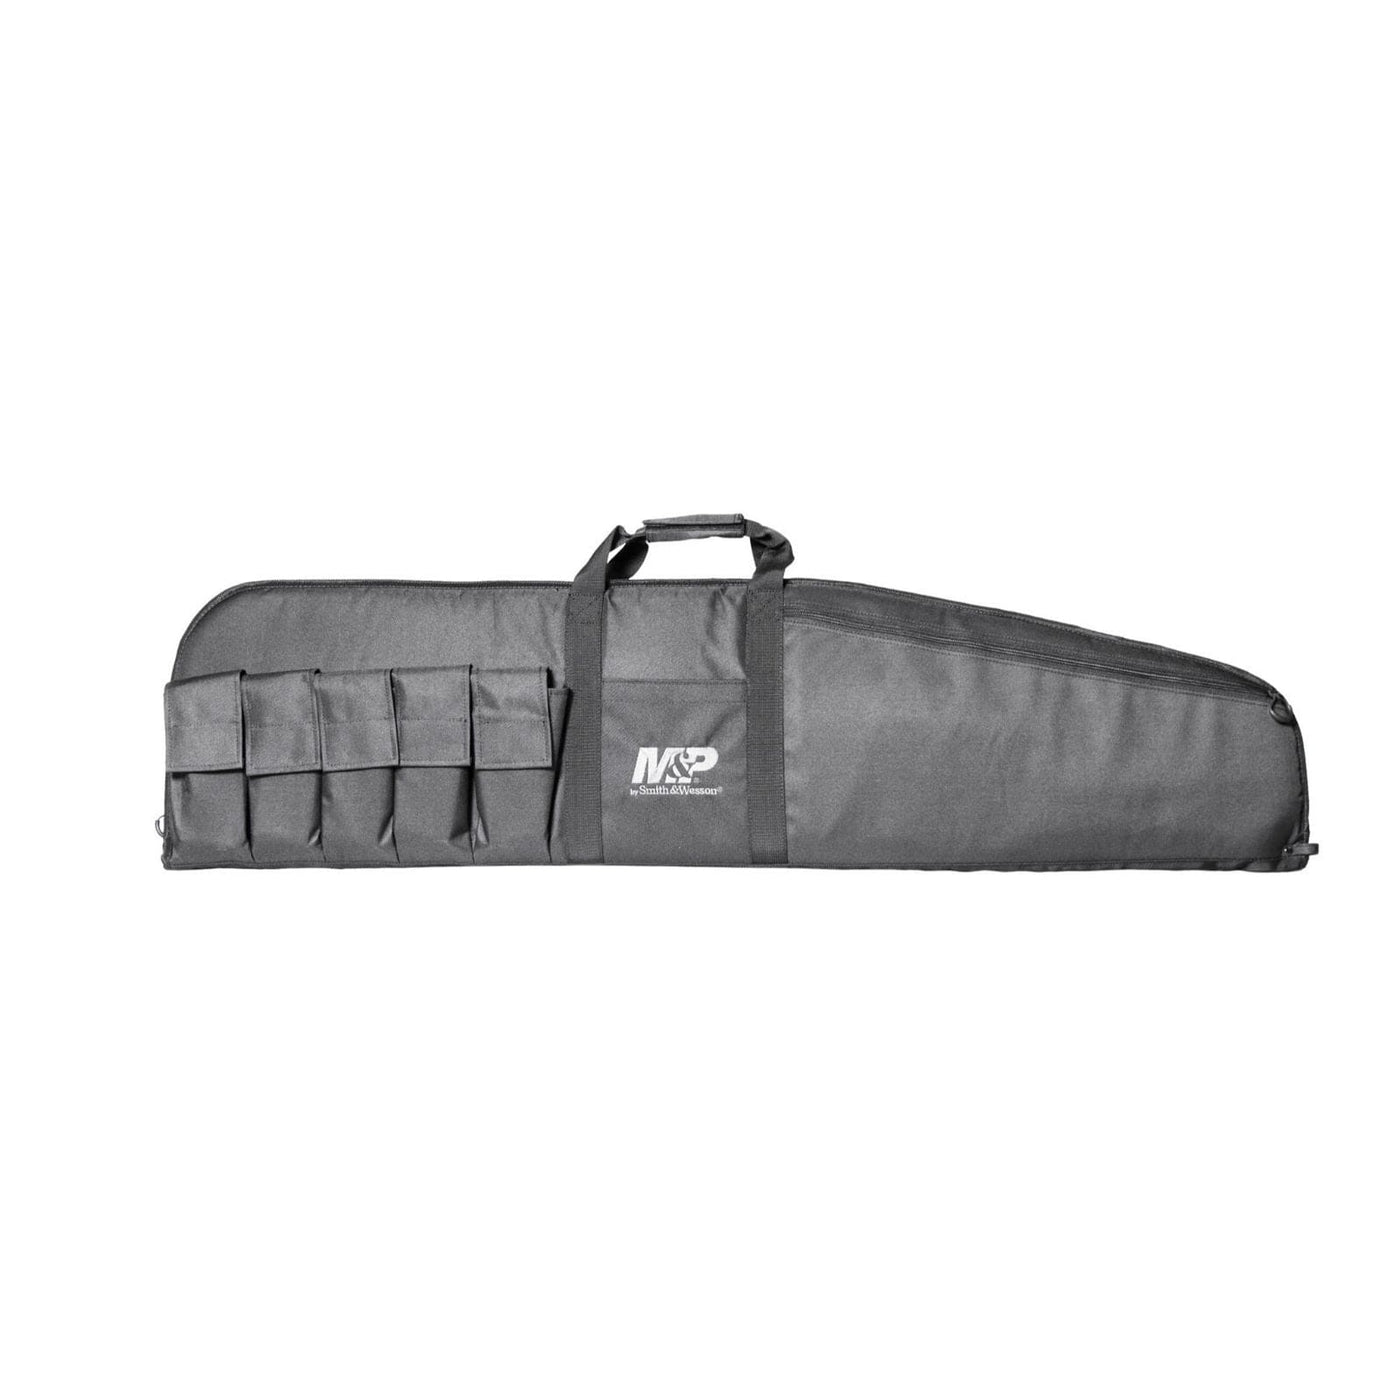 M&P by Smith & Wesson MandP Duty Series Gun Case 45in Shooting